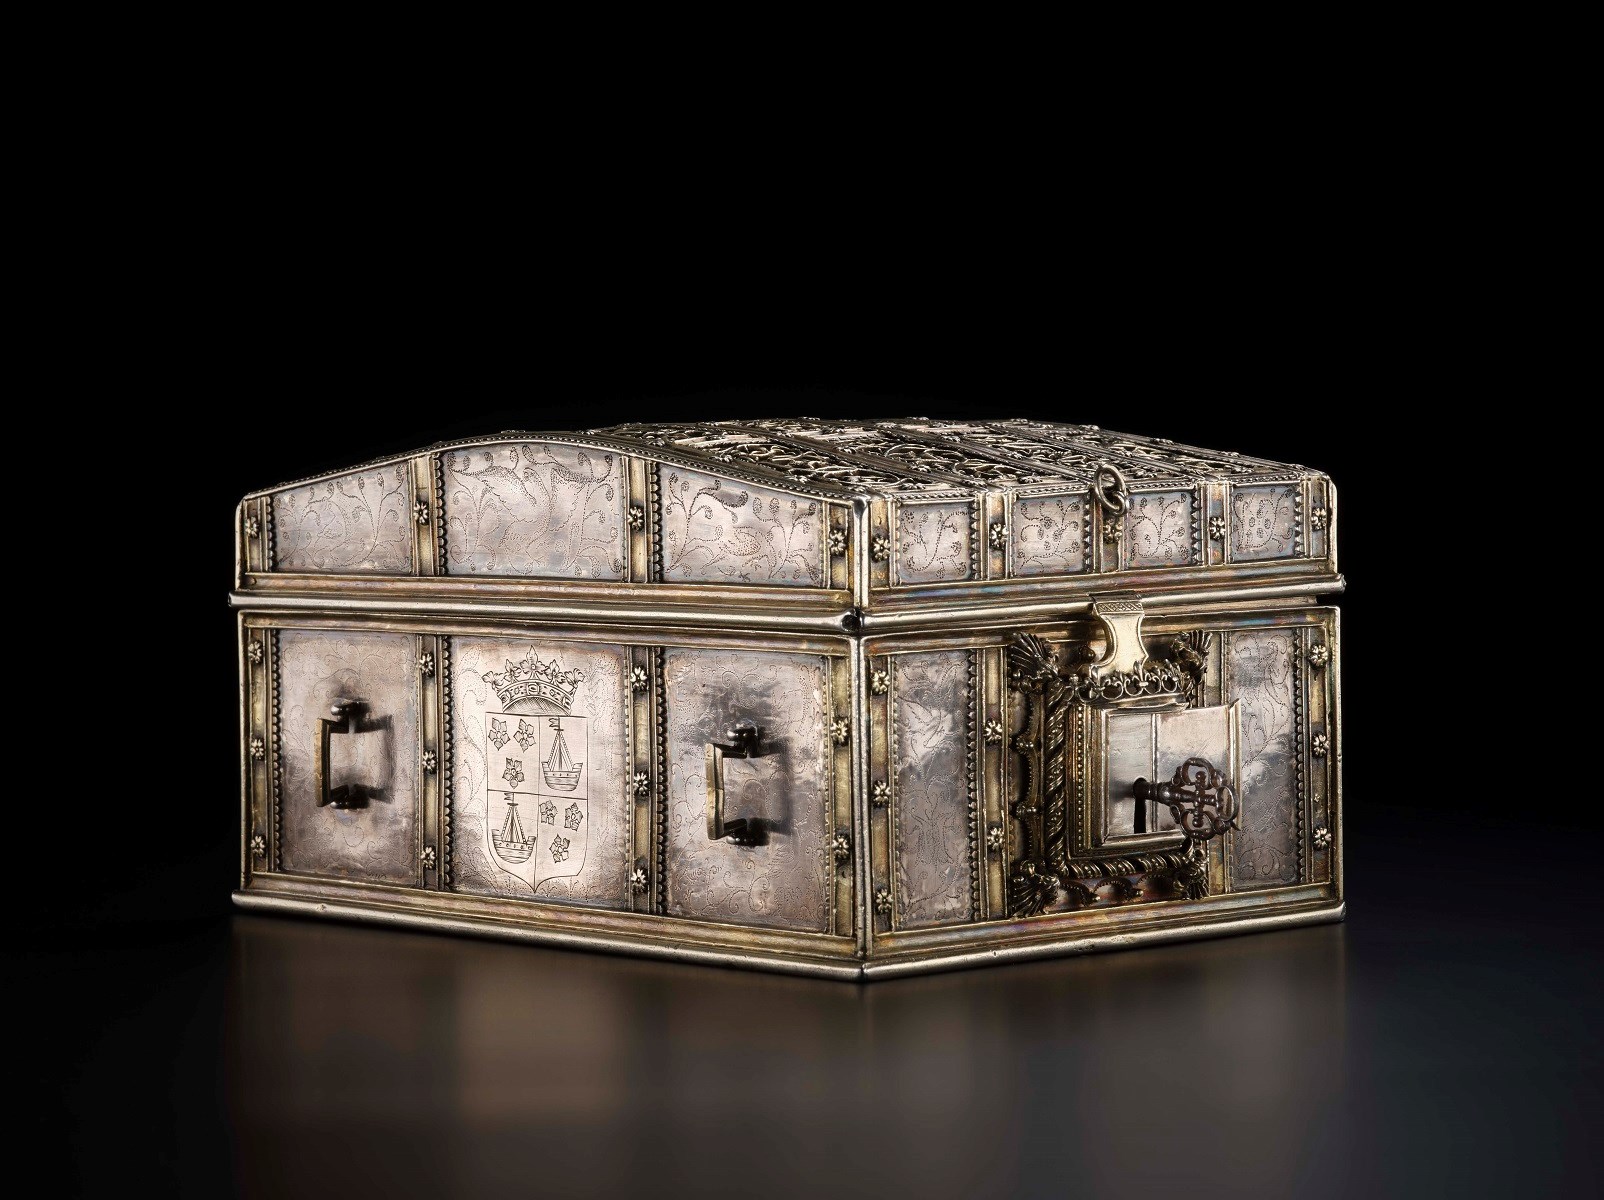 Ornate silver chest pointed at diagonally to view two sides at once. A heavy lock guards it and a coat of arms is inscribed on one side.